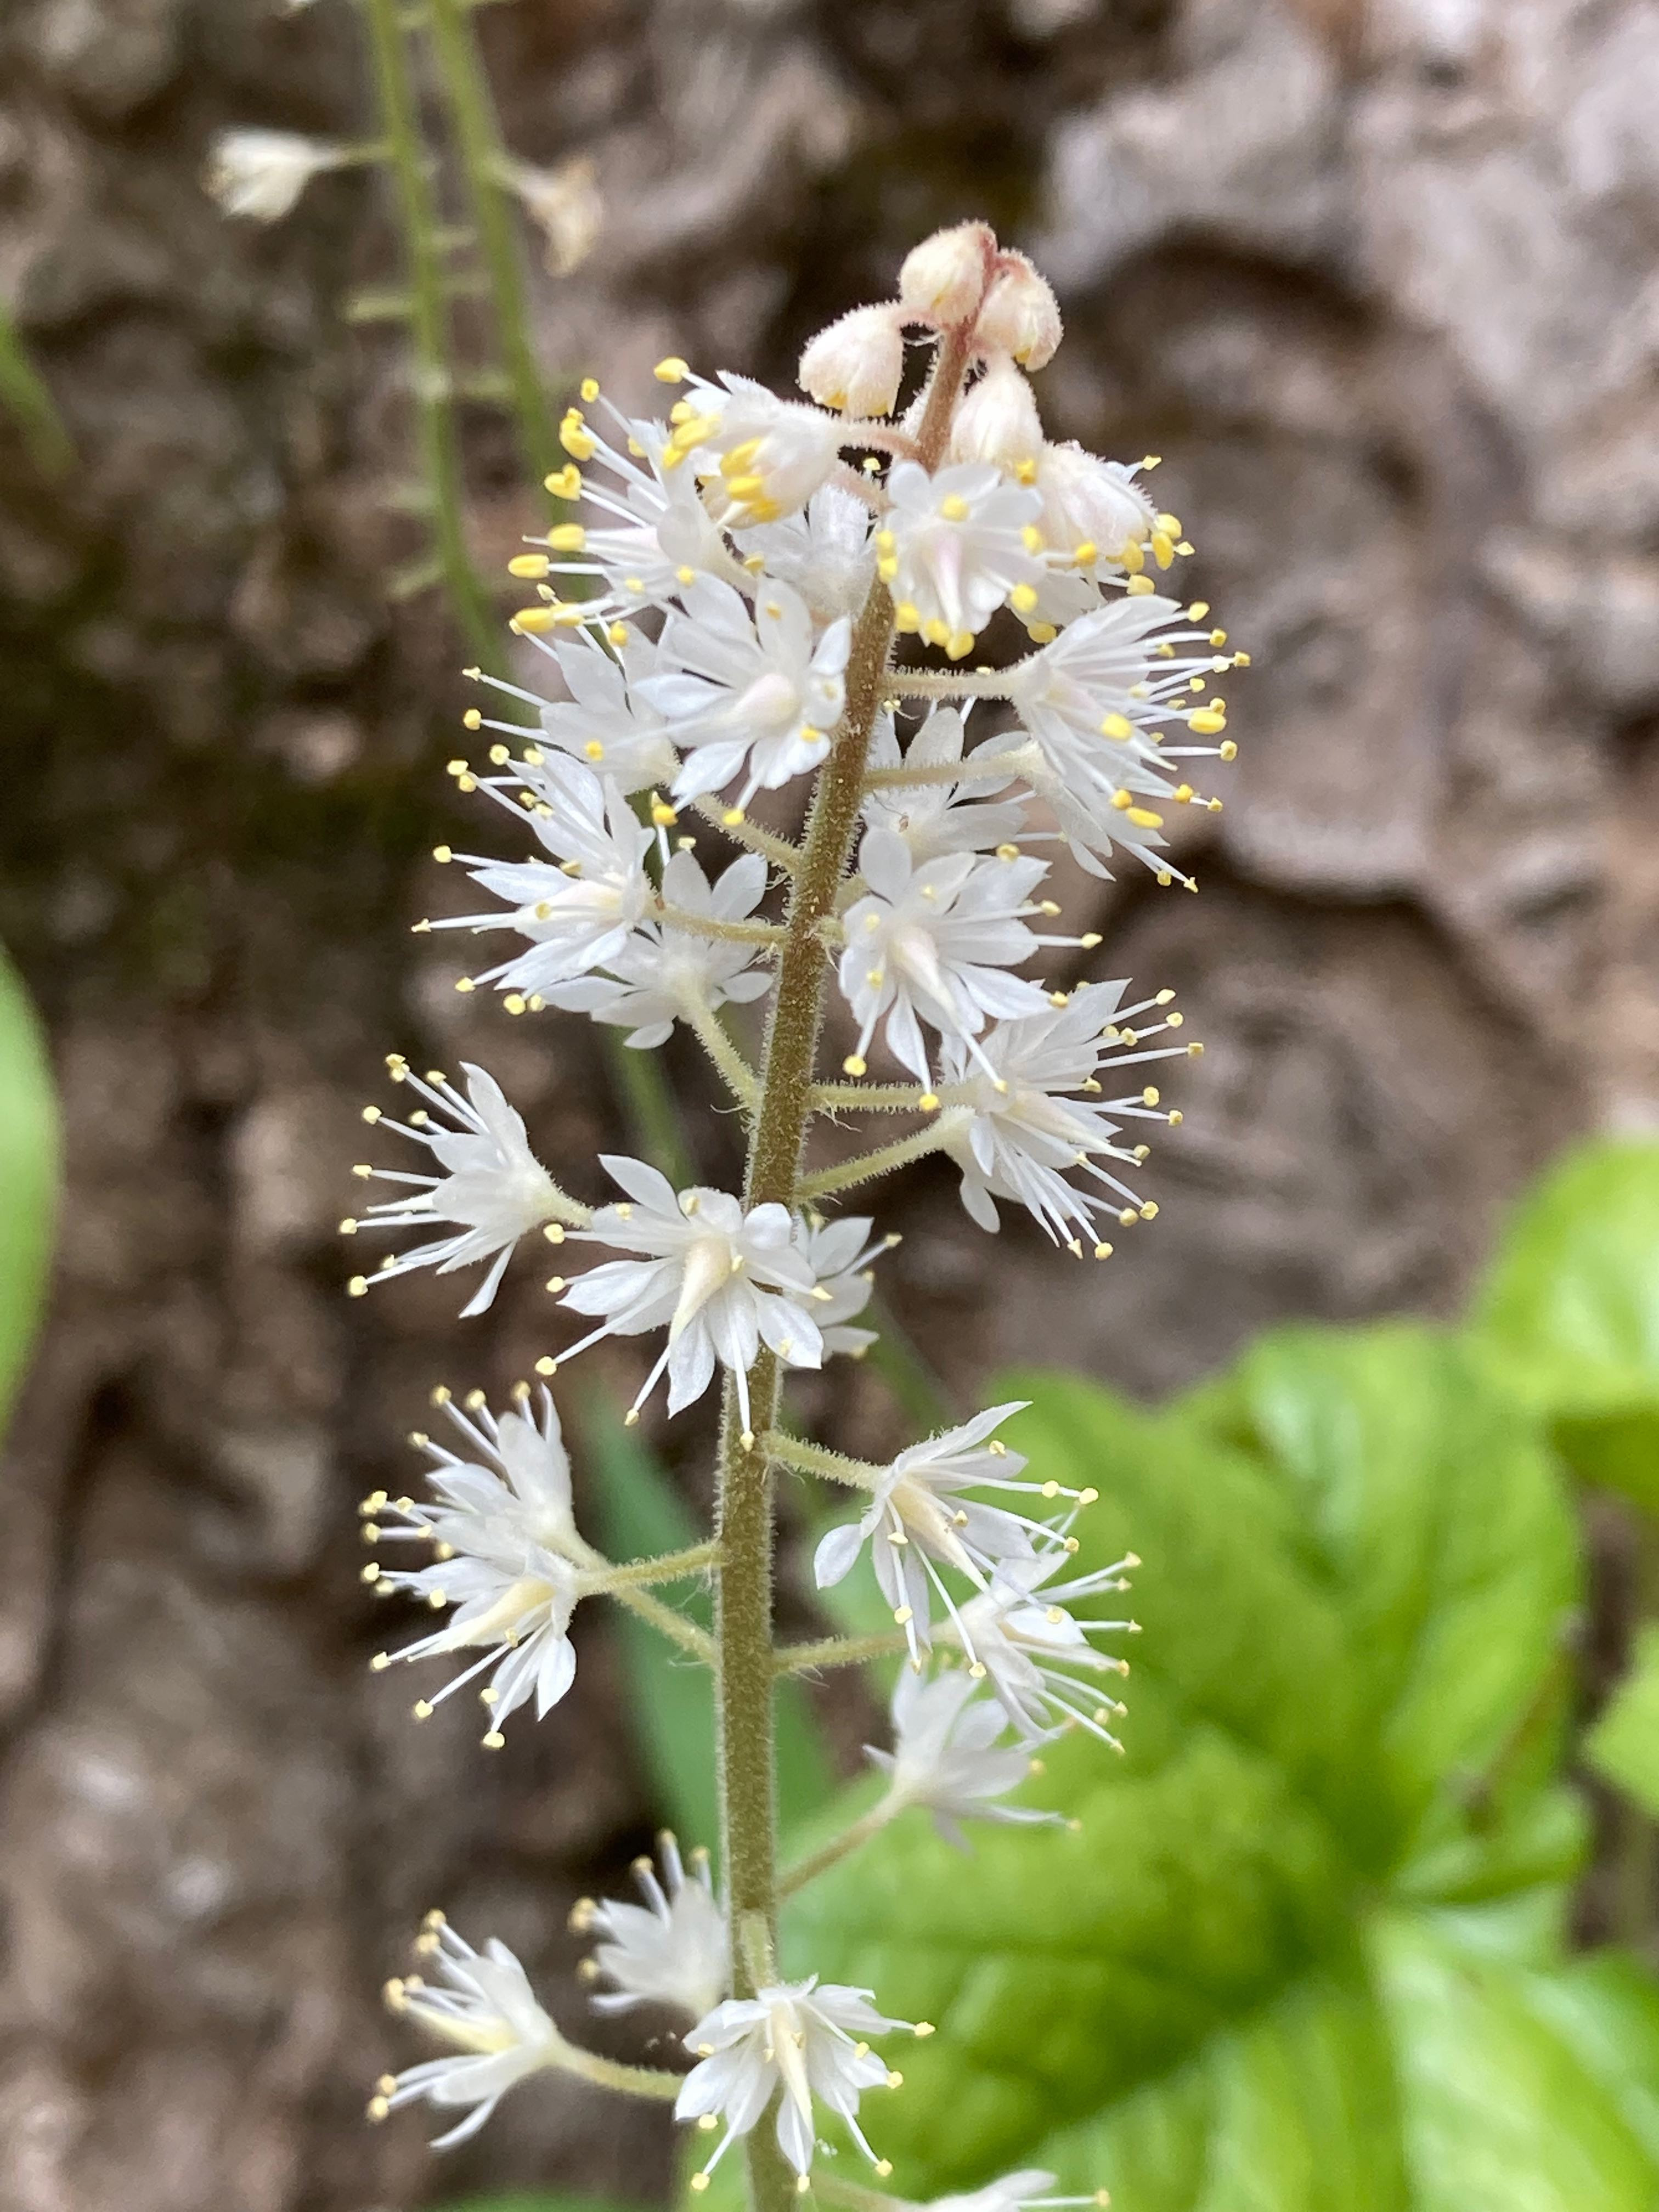 The Scientific Name is Tiarella cordifolia. You will likely hear them called Foamflower, False Miterwort. This picture shows the Dense raceme of star-shaped flowers occur in spring. of Tiarella cordifolia